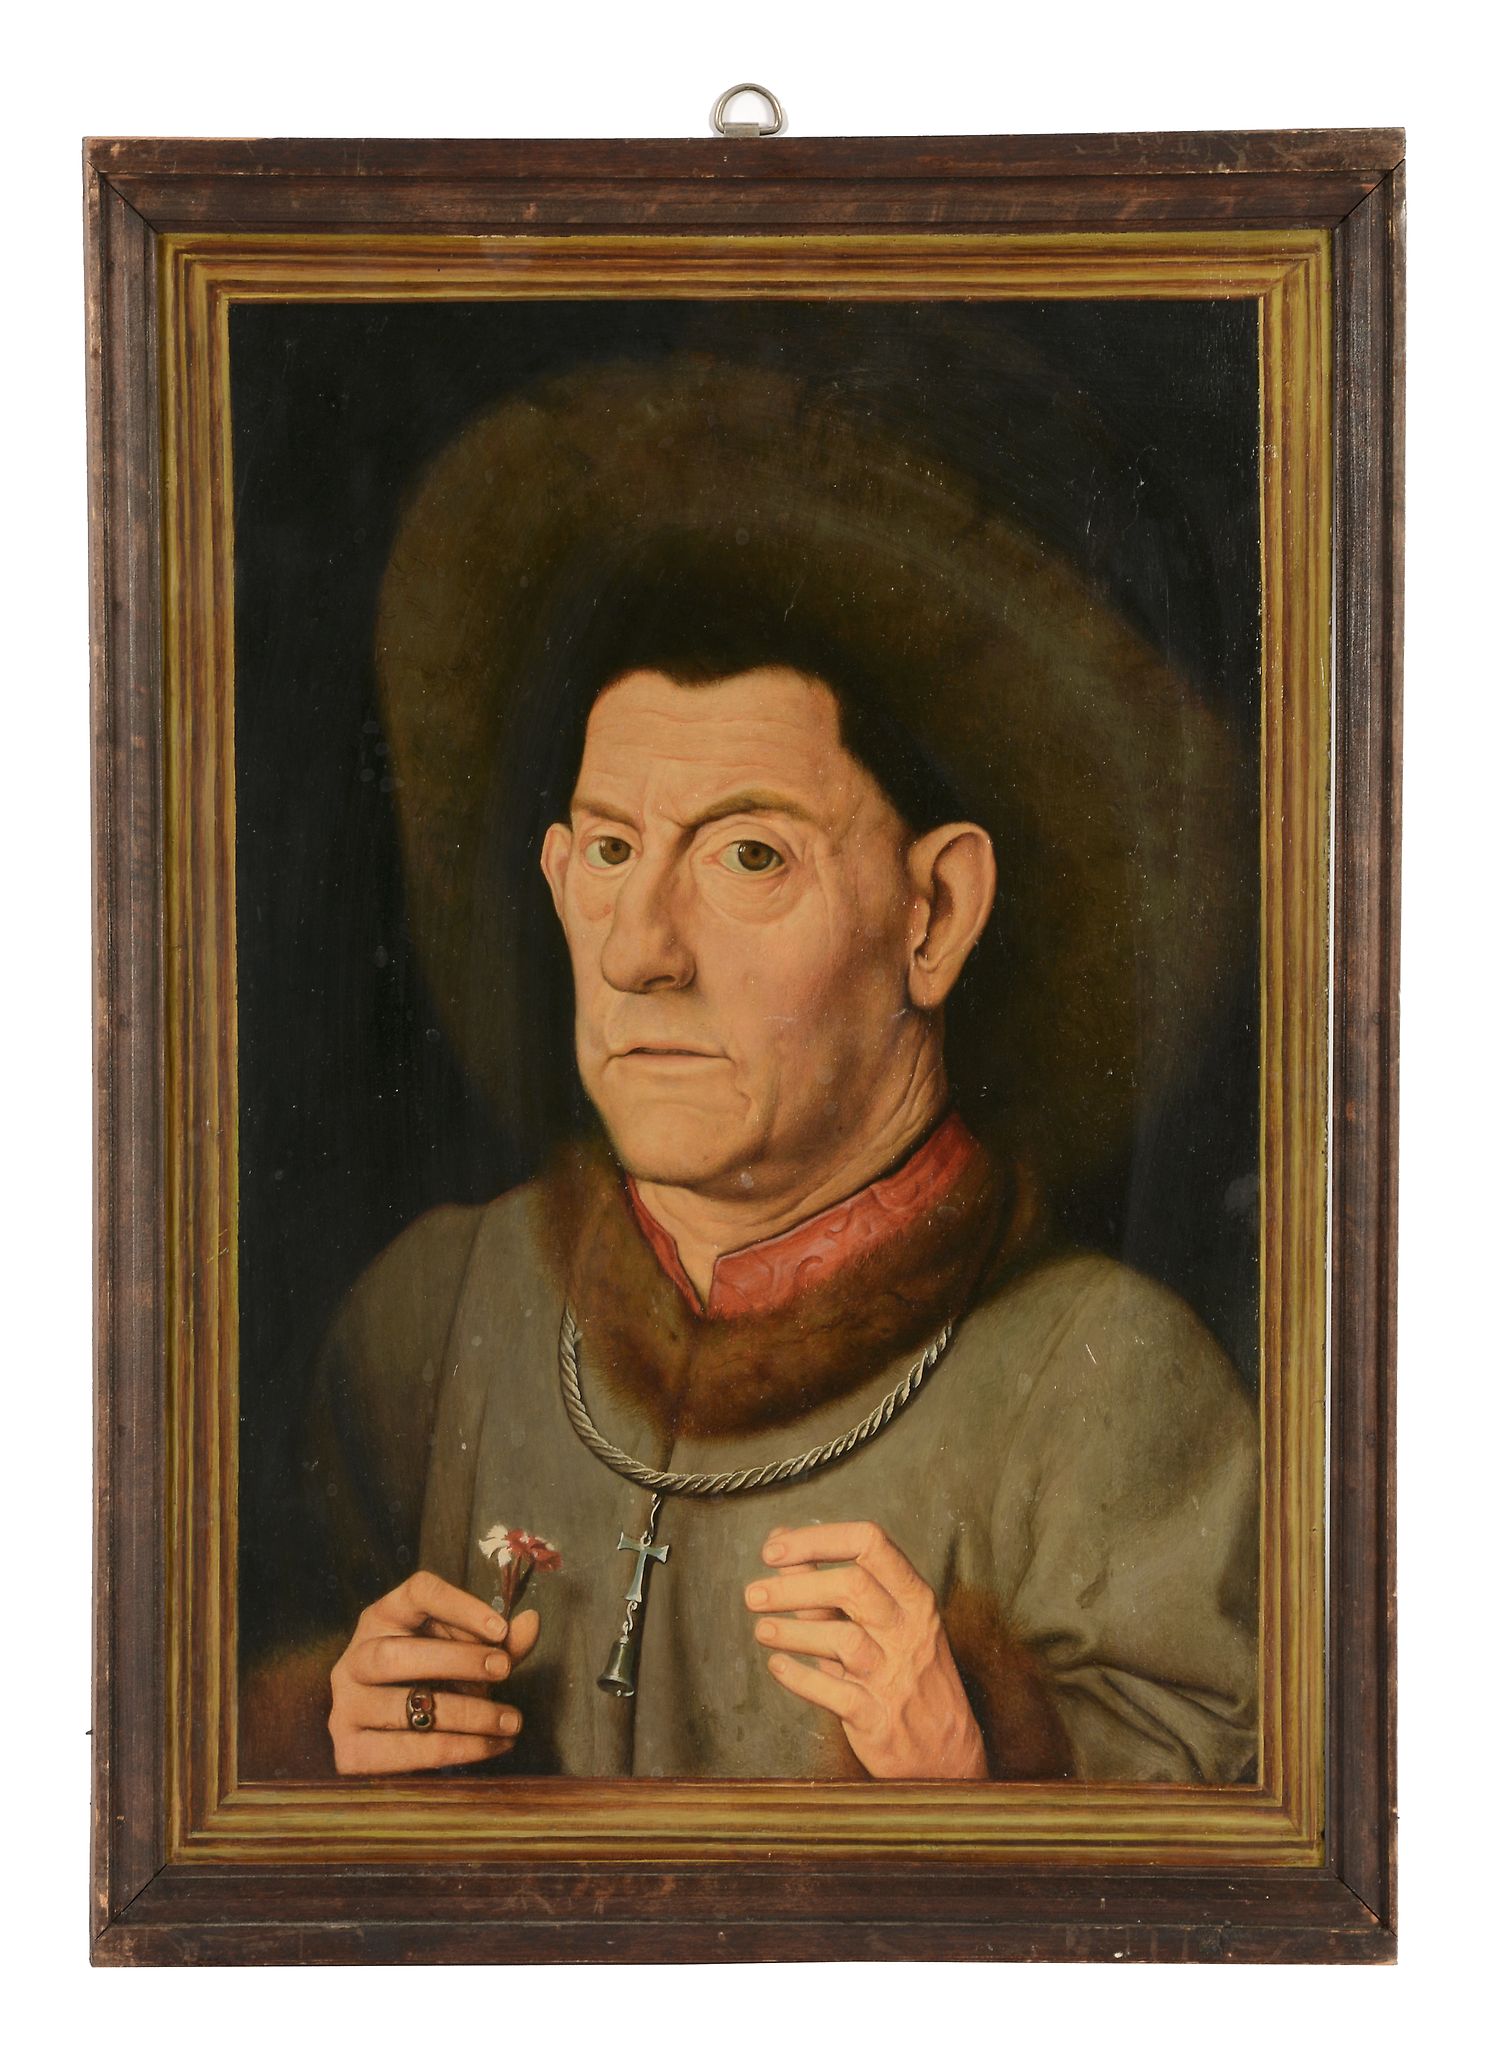 After Jan van Eyck - Portrait of a man with carnation Oil on panel 46 x 32 cm. (18 x 12 1/2 in.)